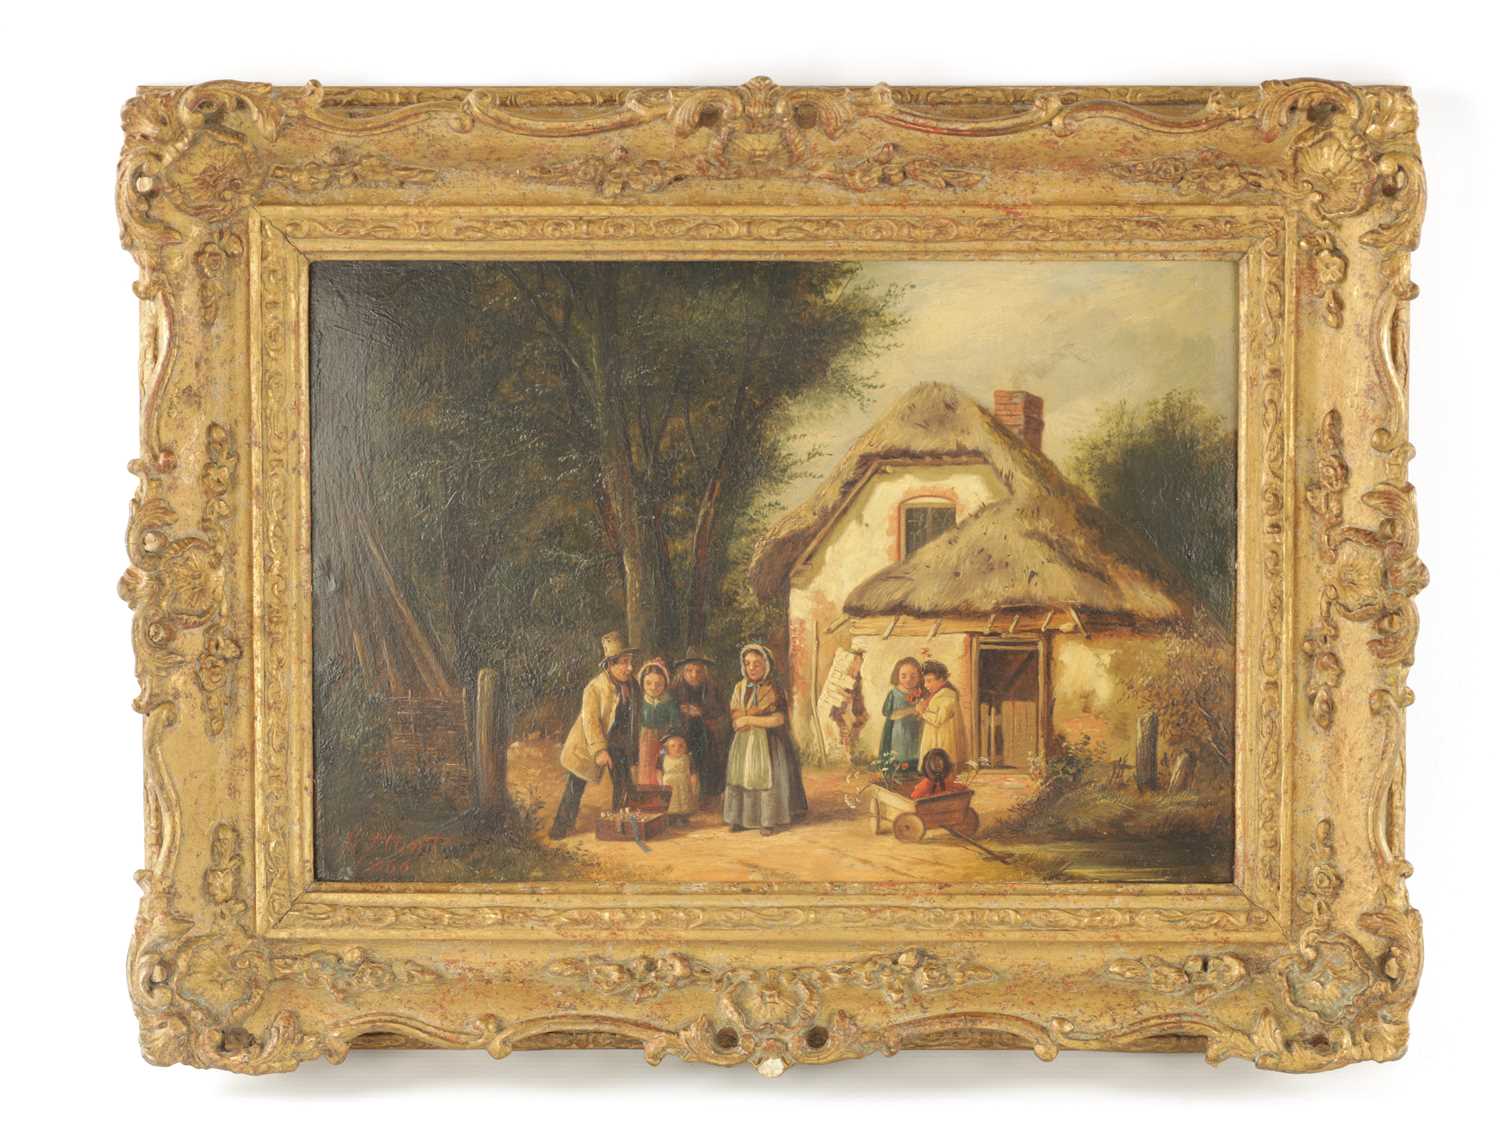 Lot 1171 - CHARLES HUNT (BRITISH, 1829-1900). A 19TH CENTURY OIL ON BOARD